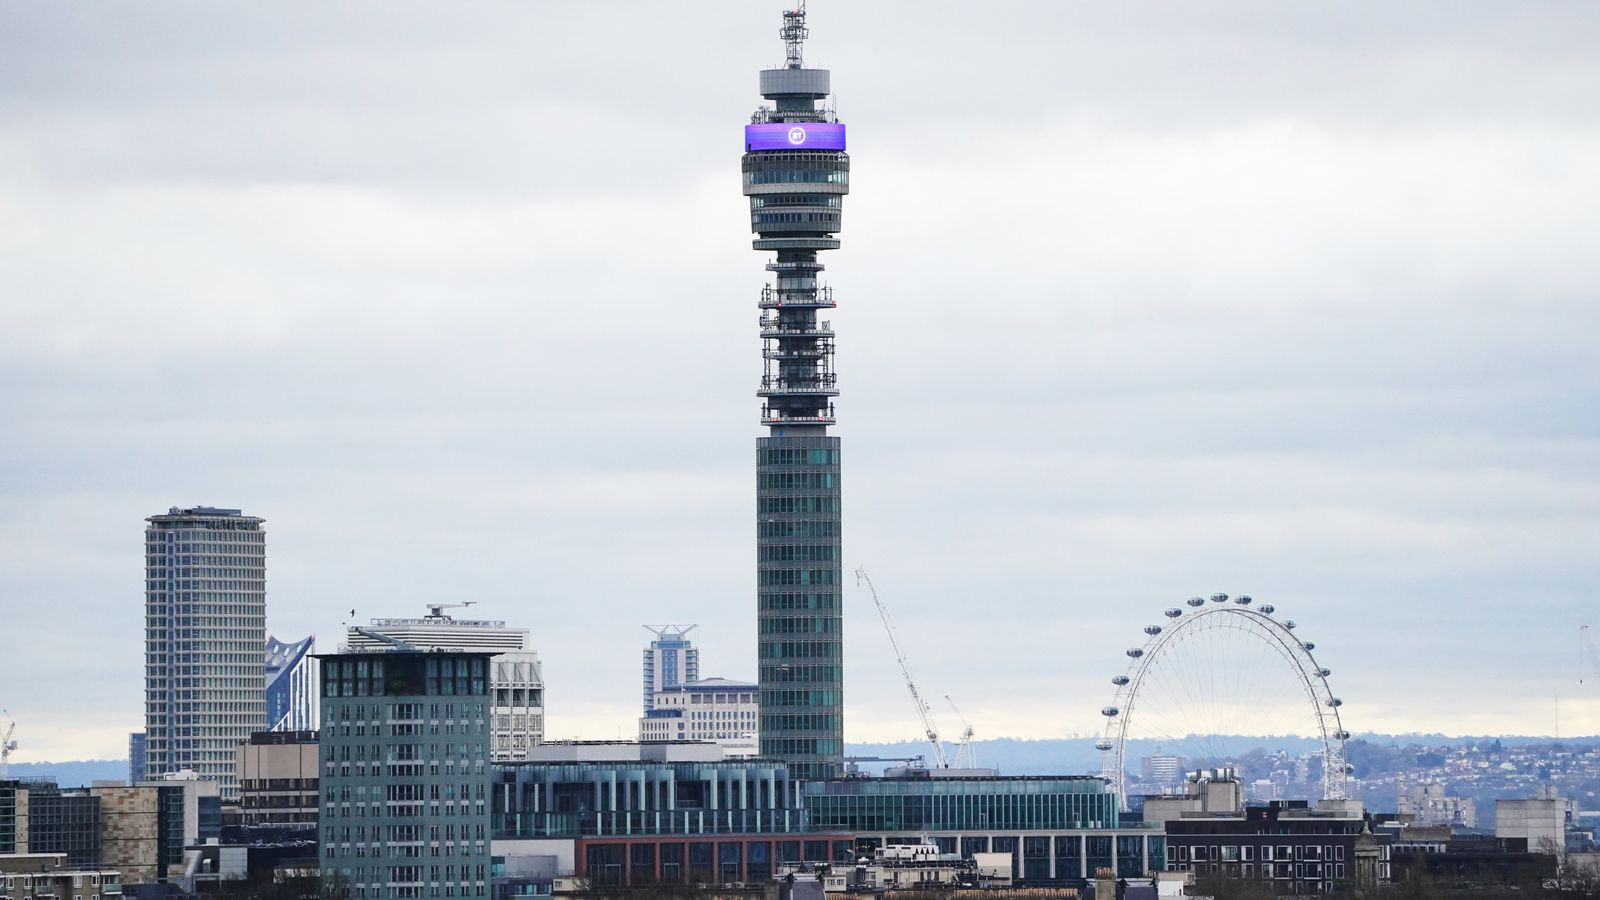 BT Tower sold to MCR Hotels in £275m deal